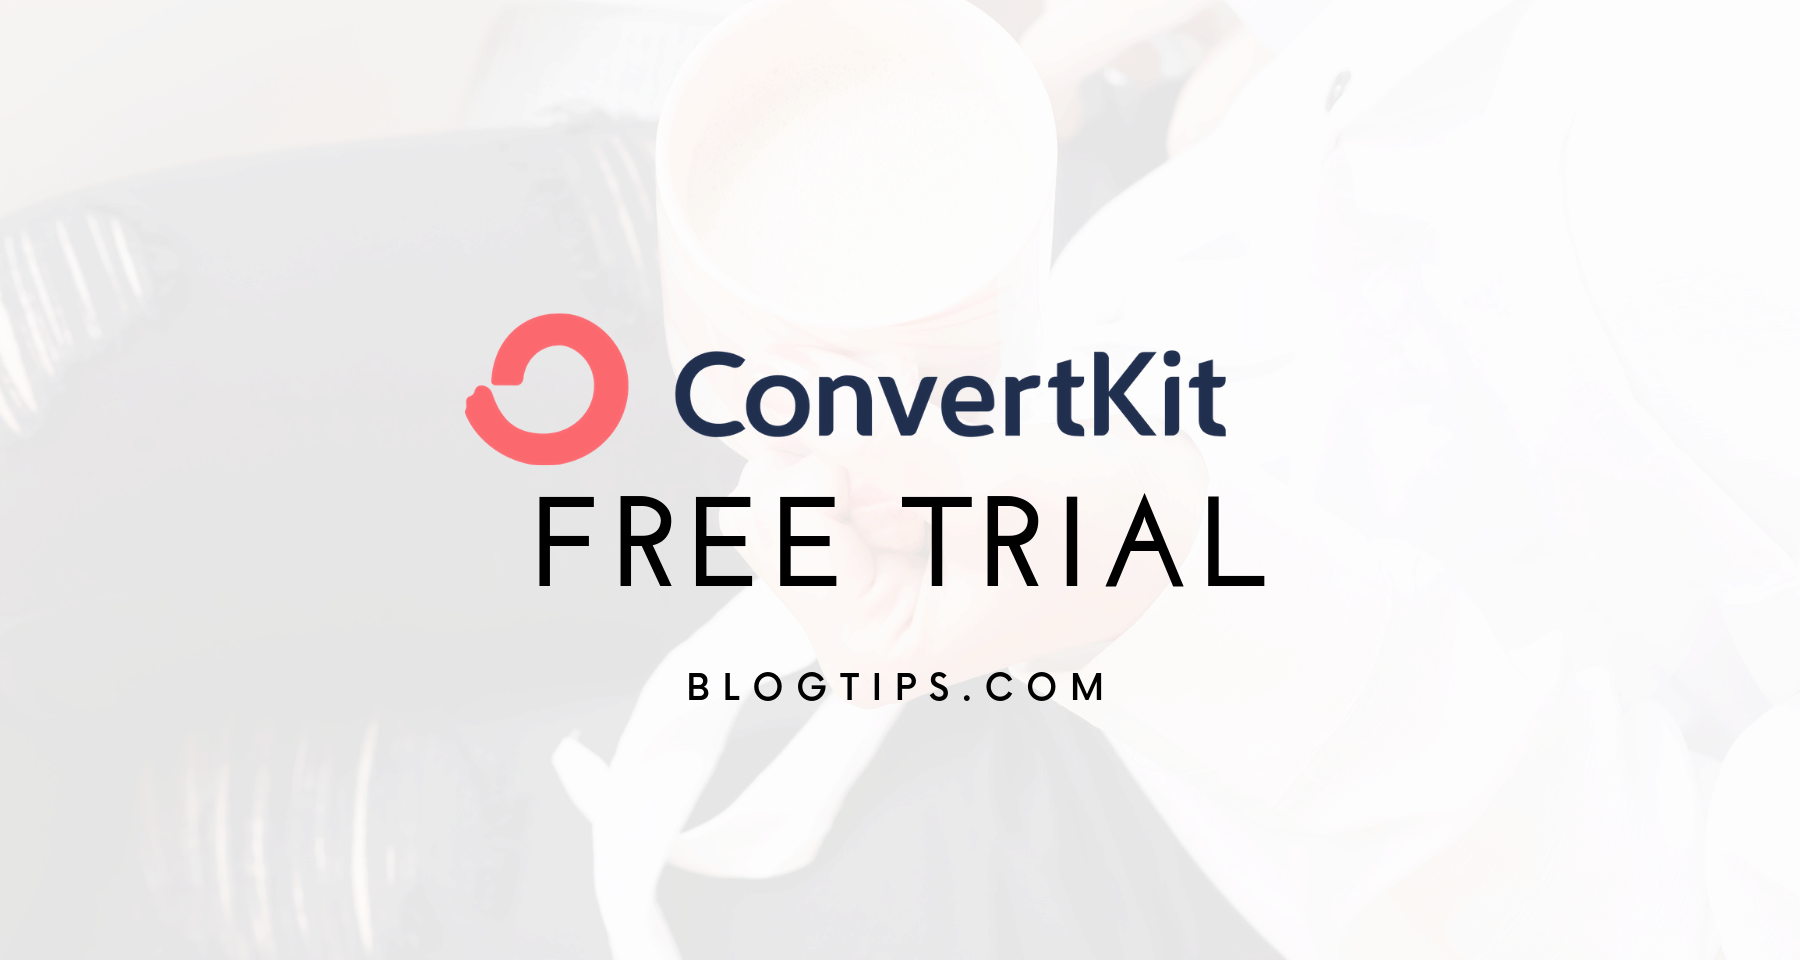 Convertkit free trial email marketing tools blogtips.com